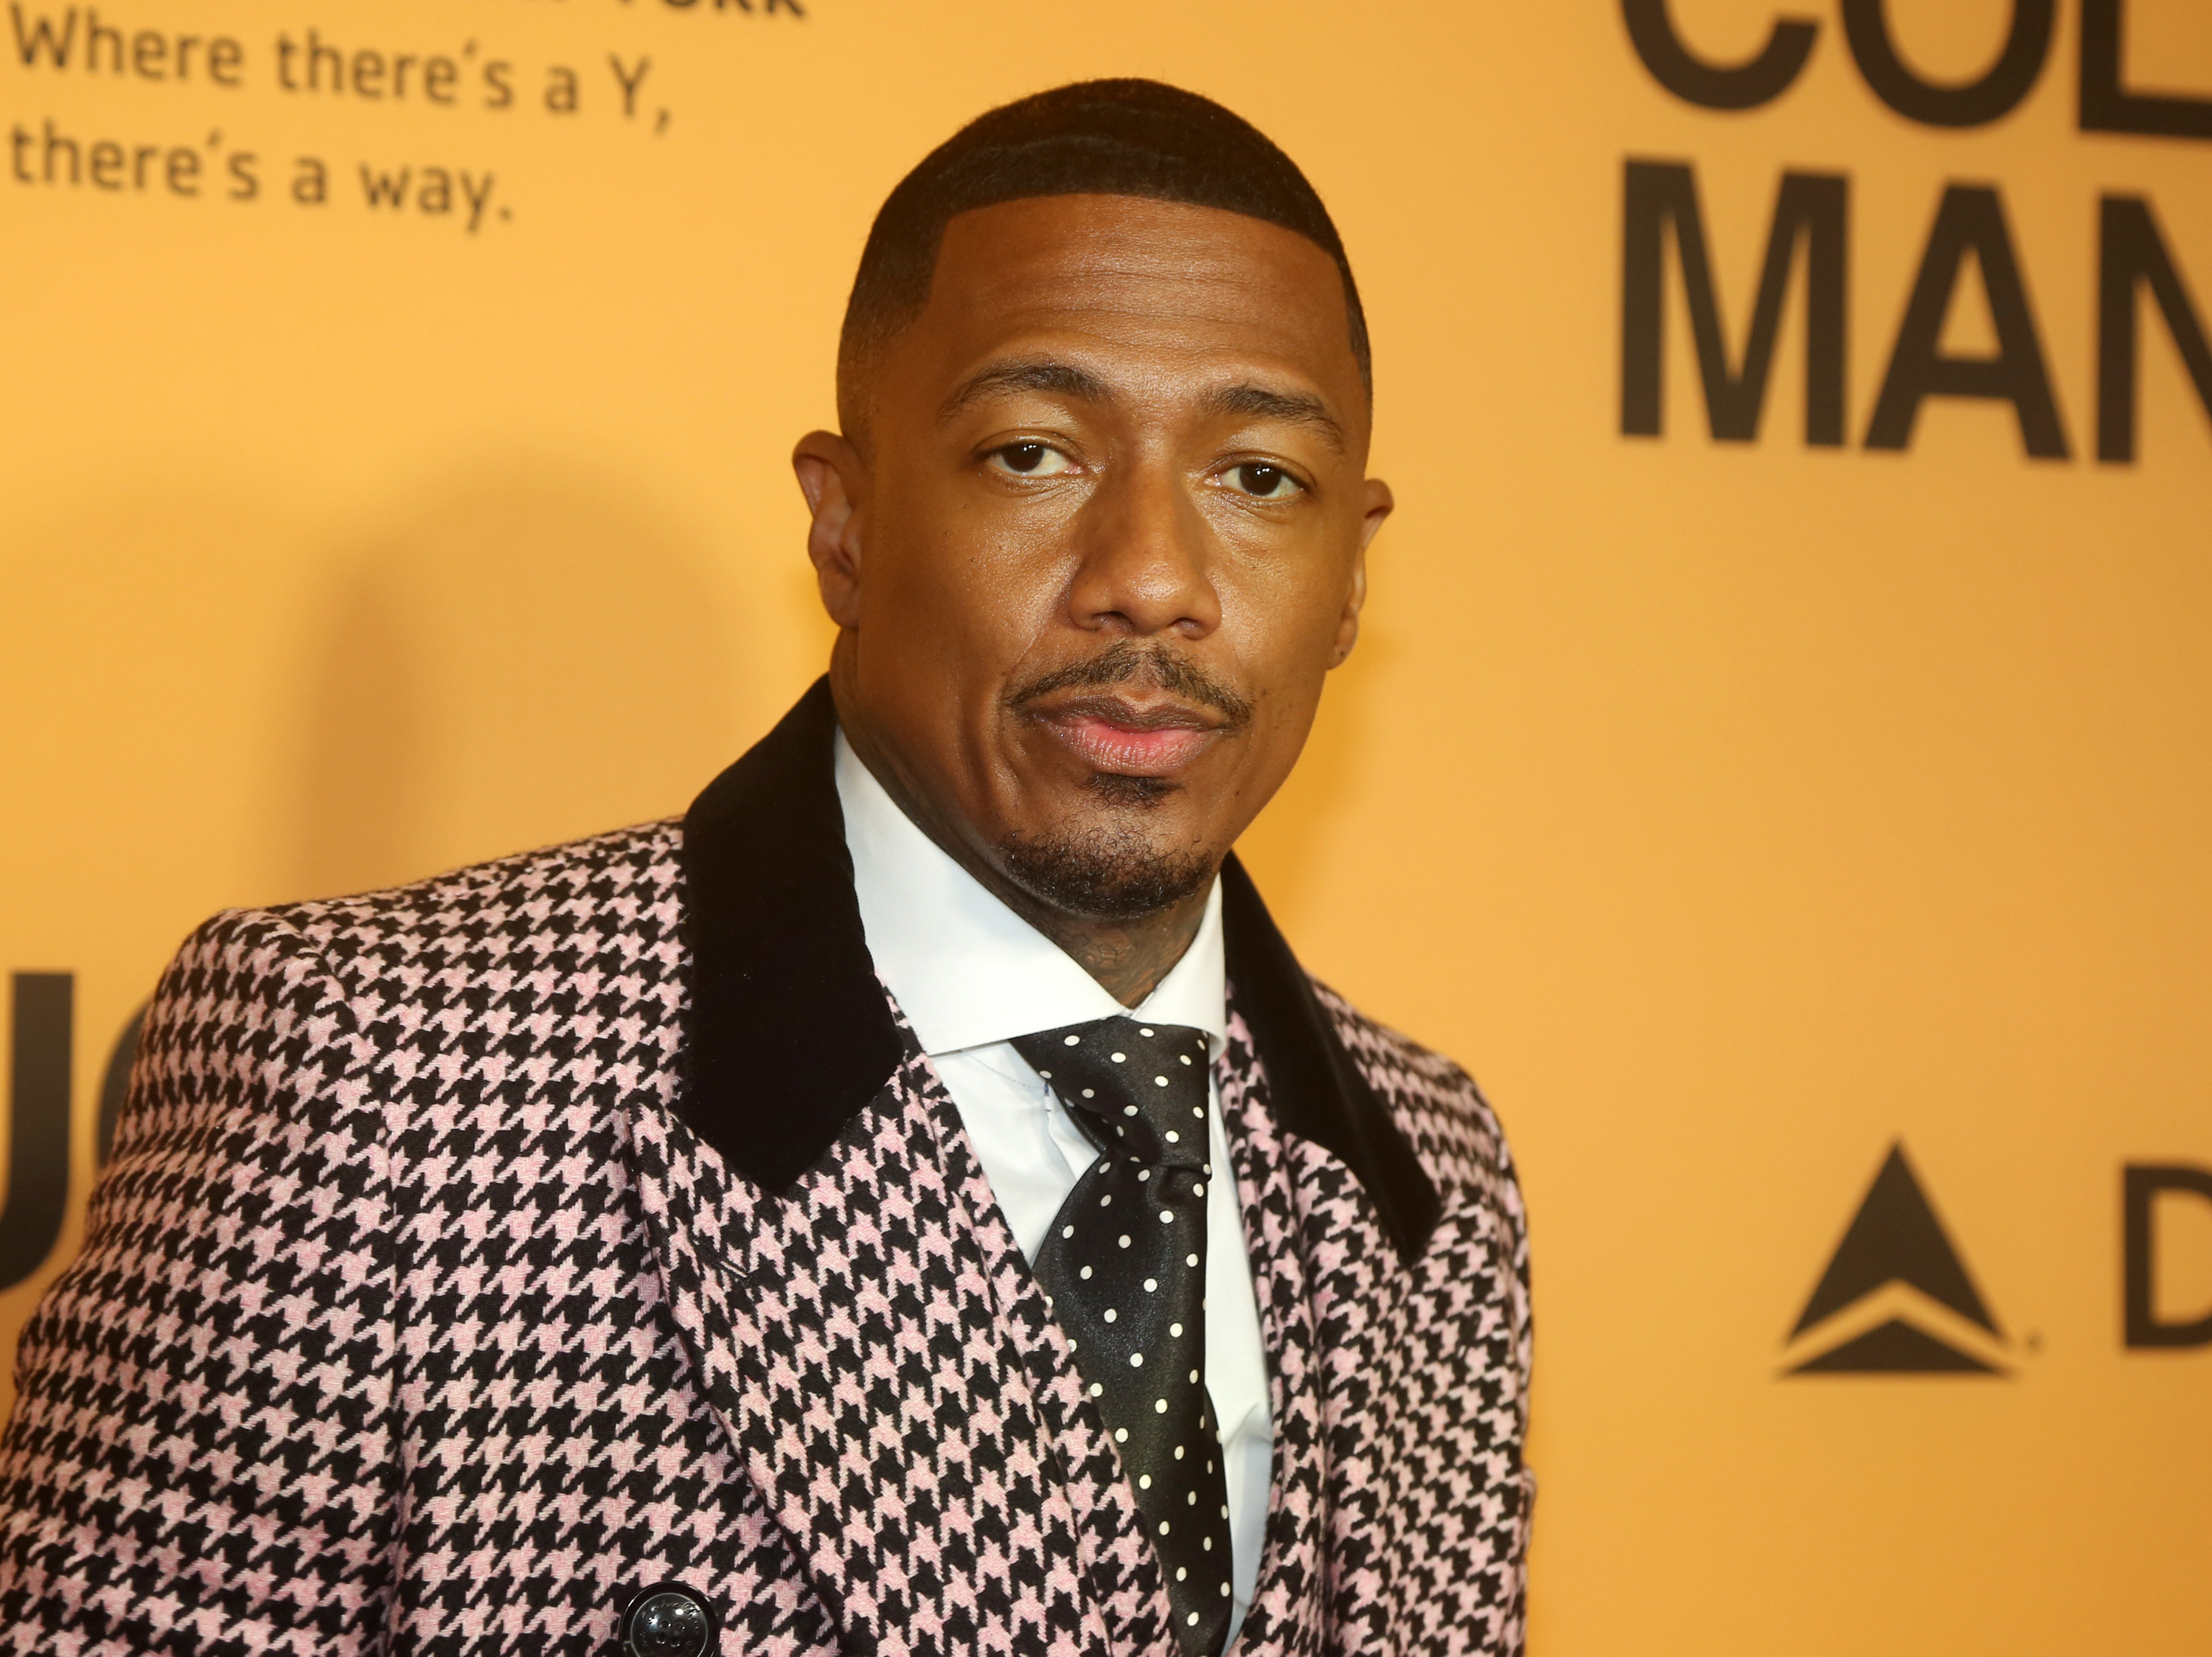 Nick Cannon in a houndstooth suit and polka dot tie on the red carpet at an event